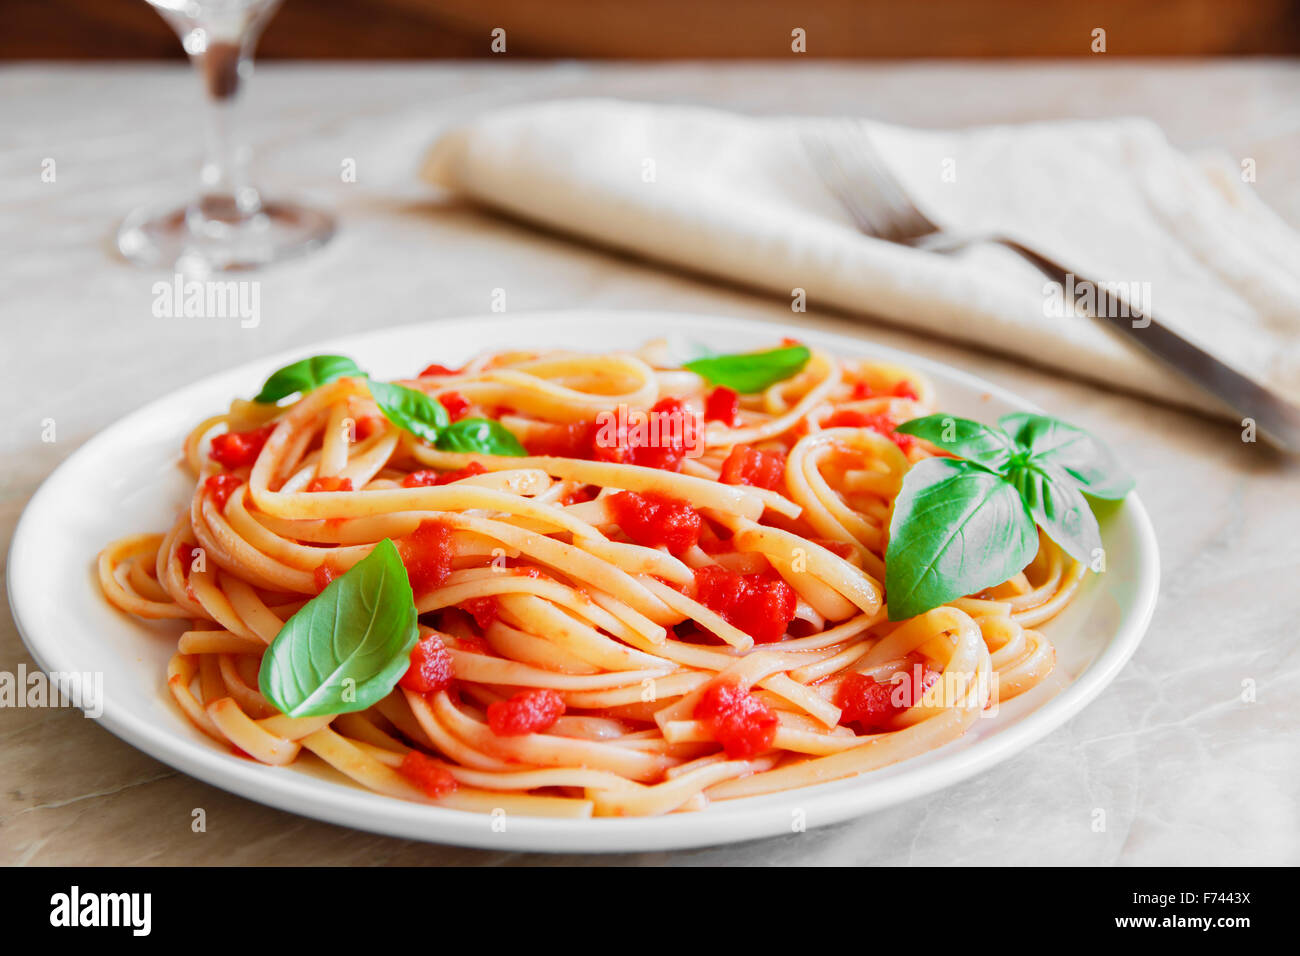 Linguine pasta in tomato sauce on a plate Stock Photo